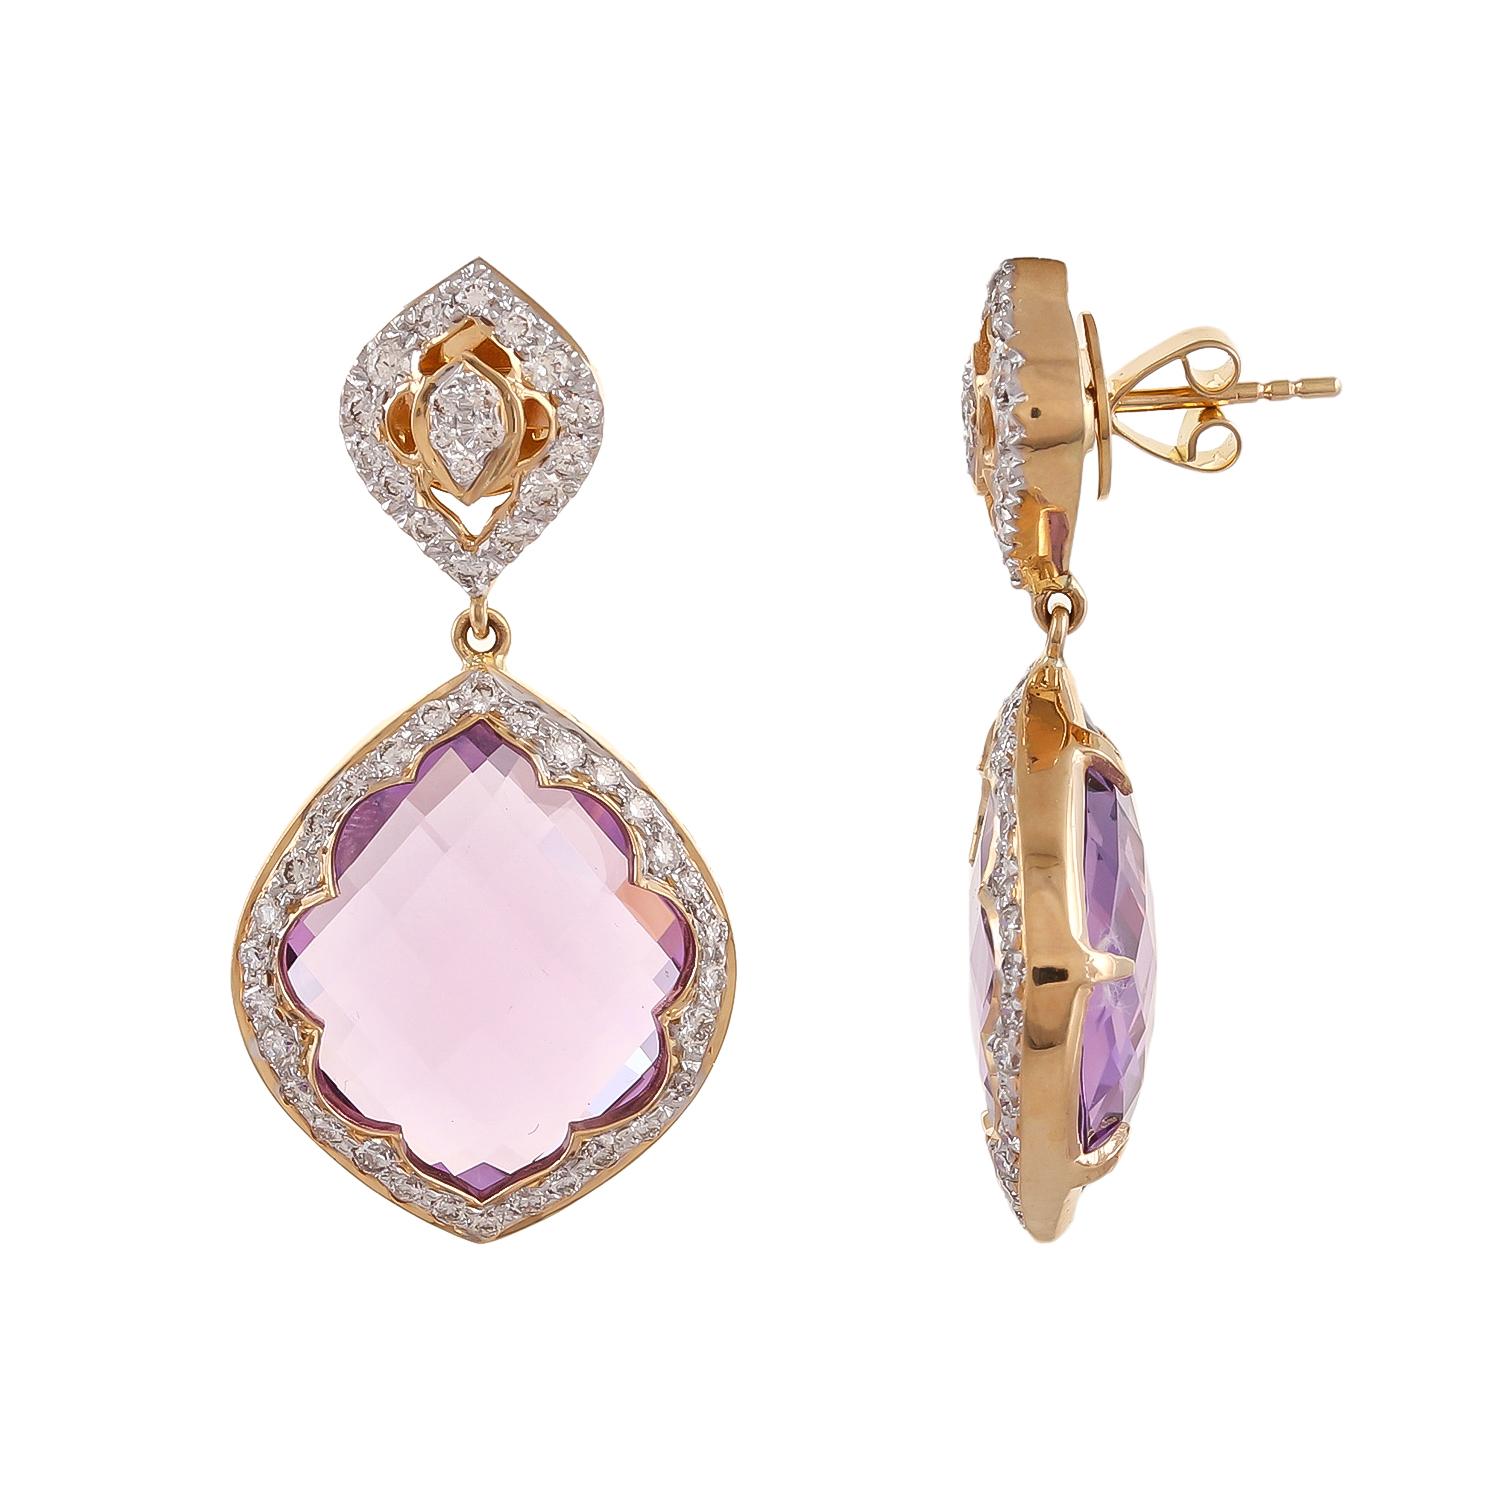  30.09 carats amethyst customized lotus shaped 18kt gold earrings are a summer essential. These are perfectly set in a floral pattern decorating the edges with 1.38ct diamonds and giving it a perfect example of pure craftsmanship.
Art of gifting: